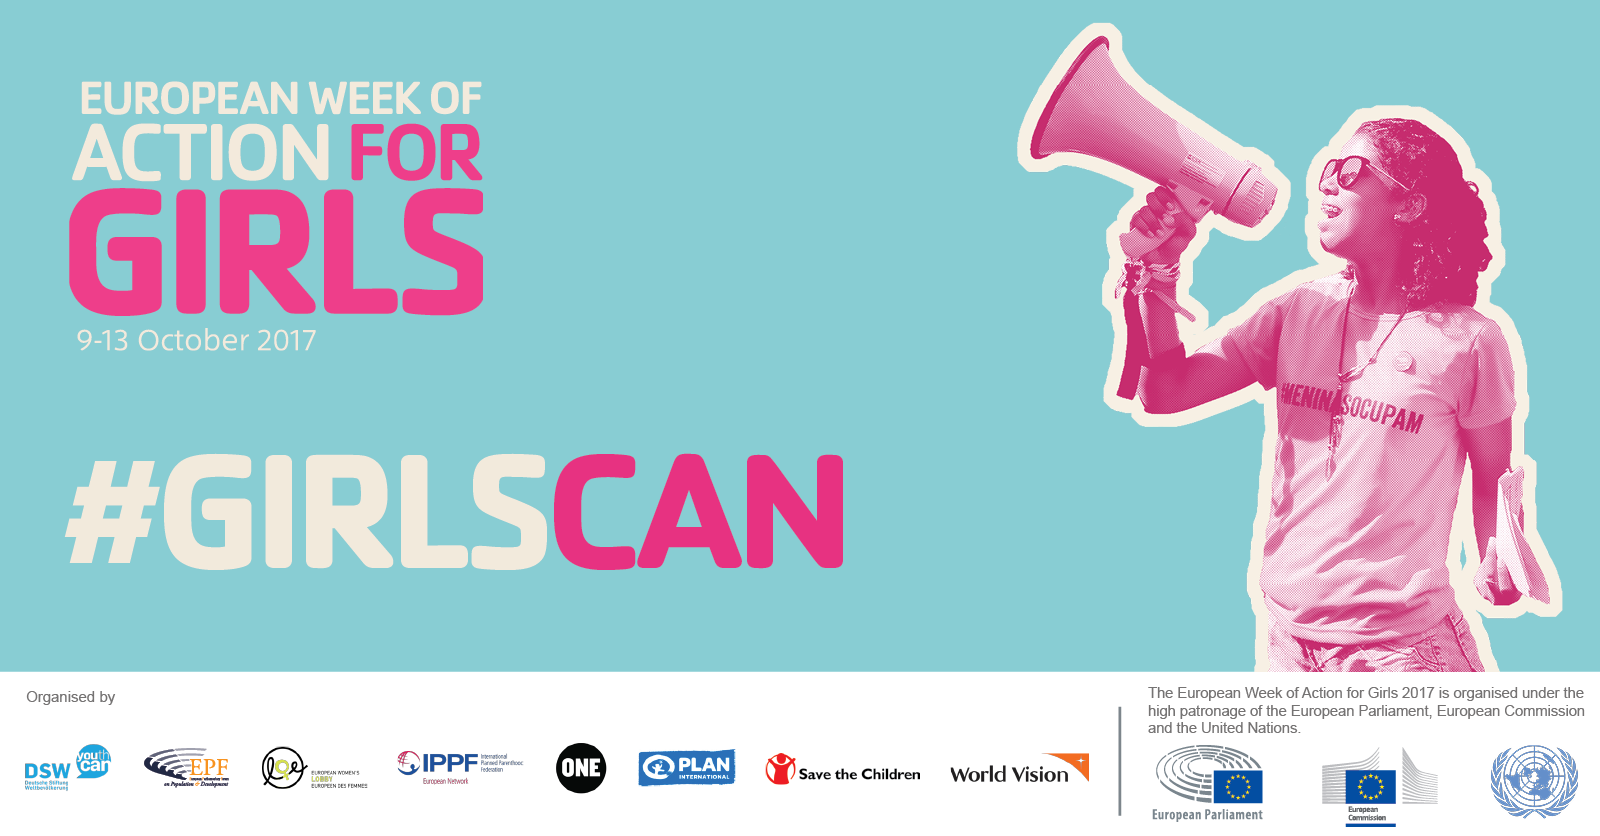 [Image: European Week of Action for Girls: Girls can thrive, inspire, succeed!]